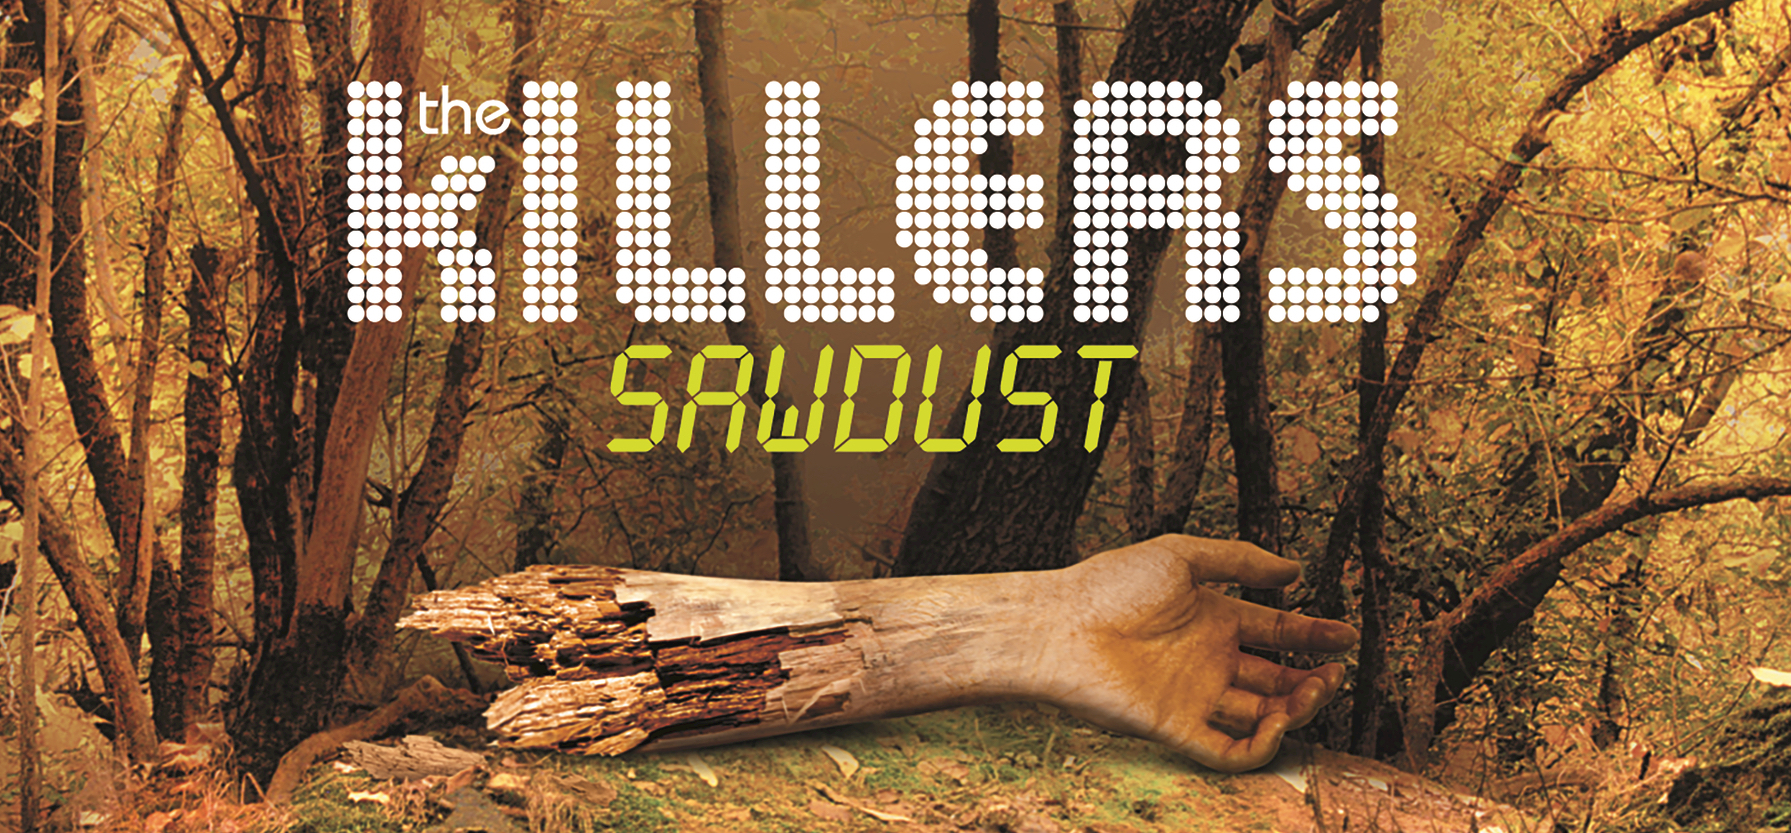 10 years later, ‘Sawdust’ still holds some of The Killers’ best work